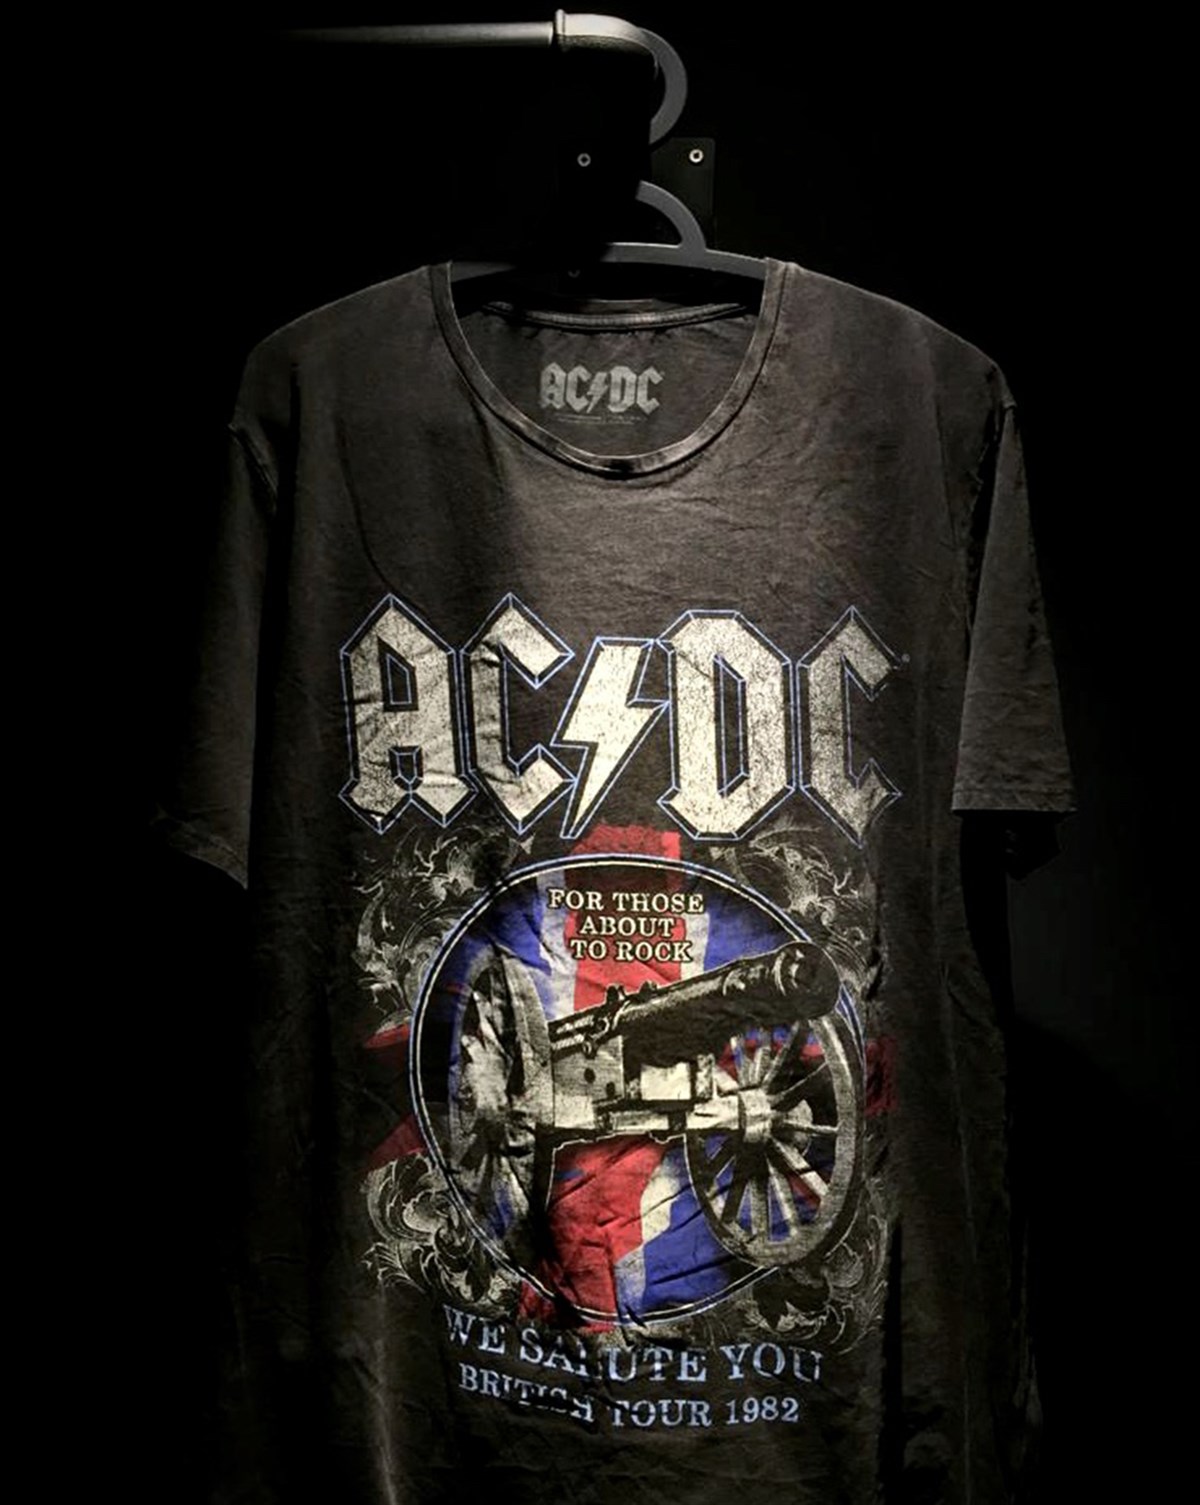 Those ACDC to Rock BRITISH WE TOUR T-Shirt About SALUTE YOU 1982 For